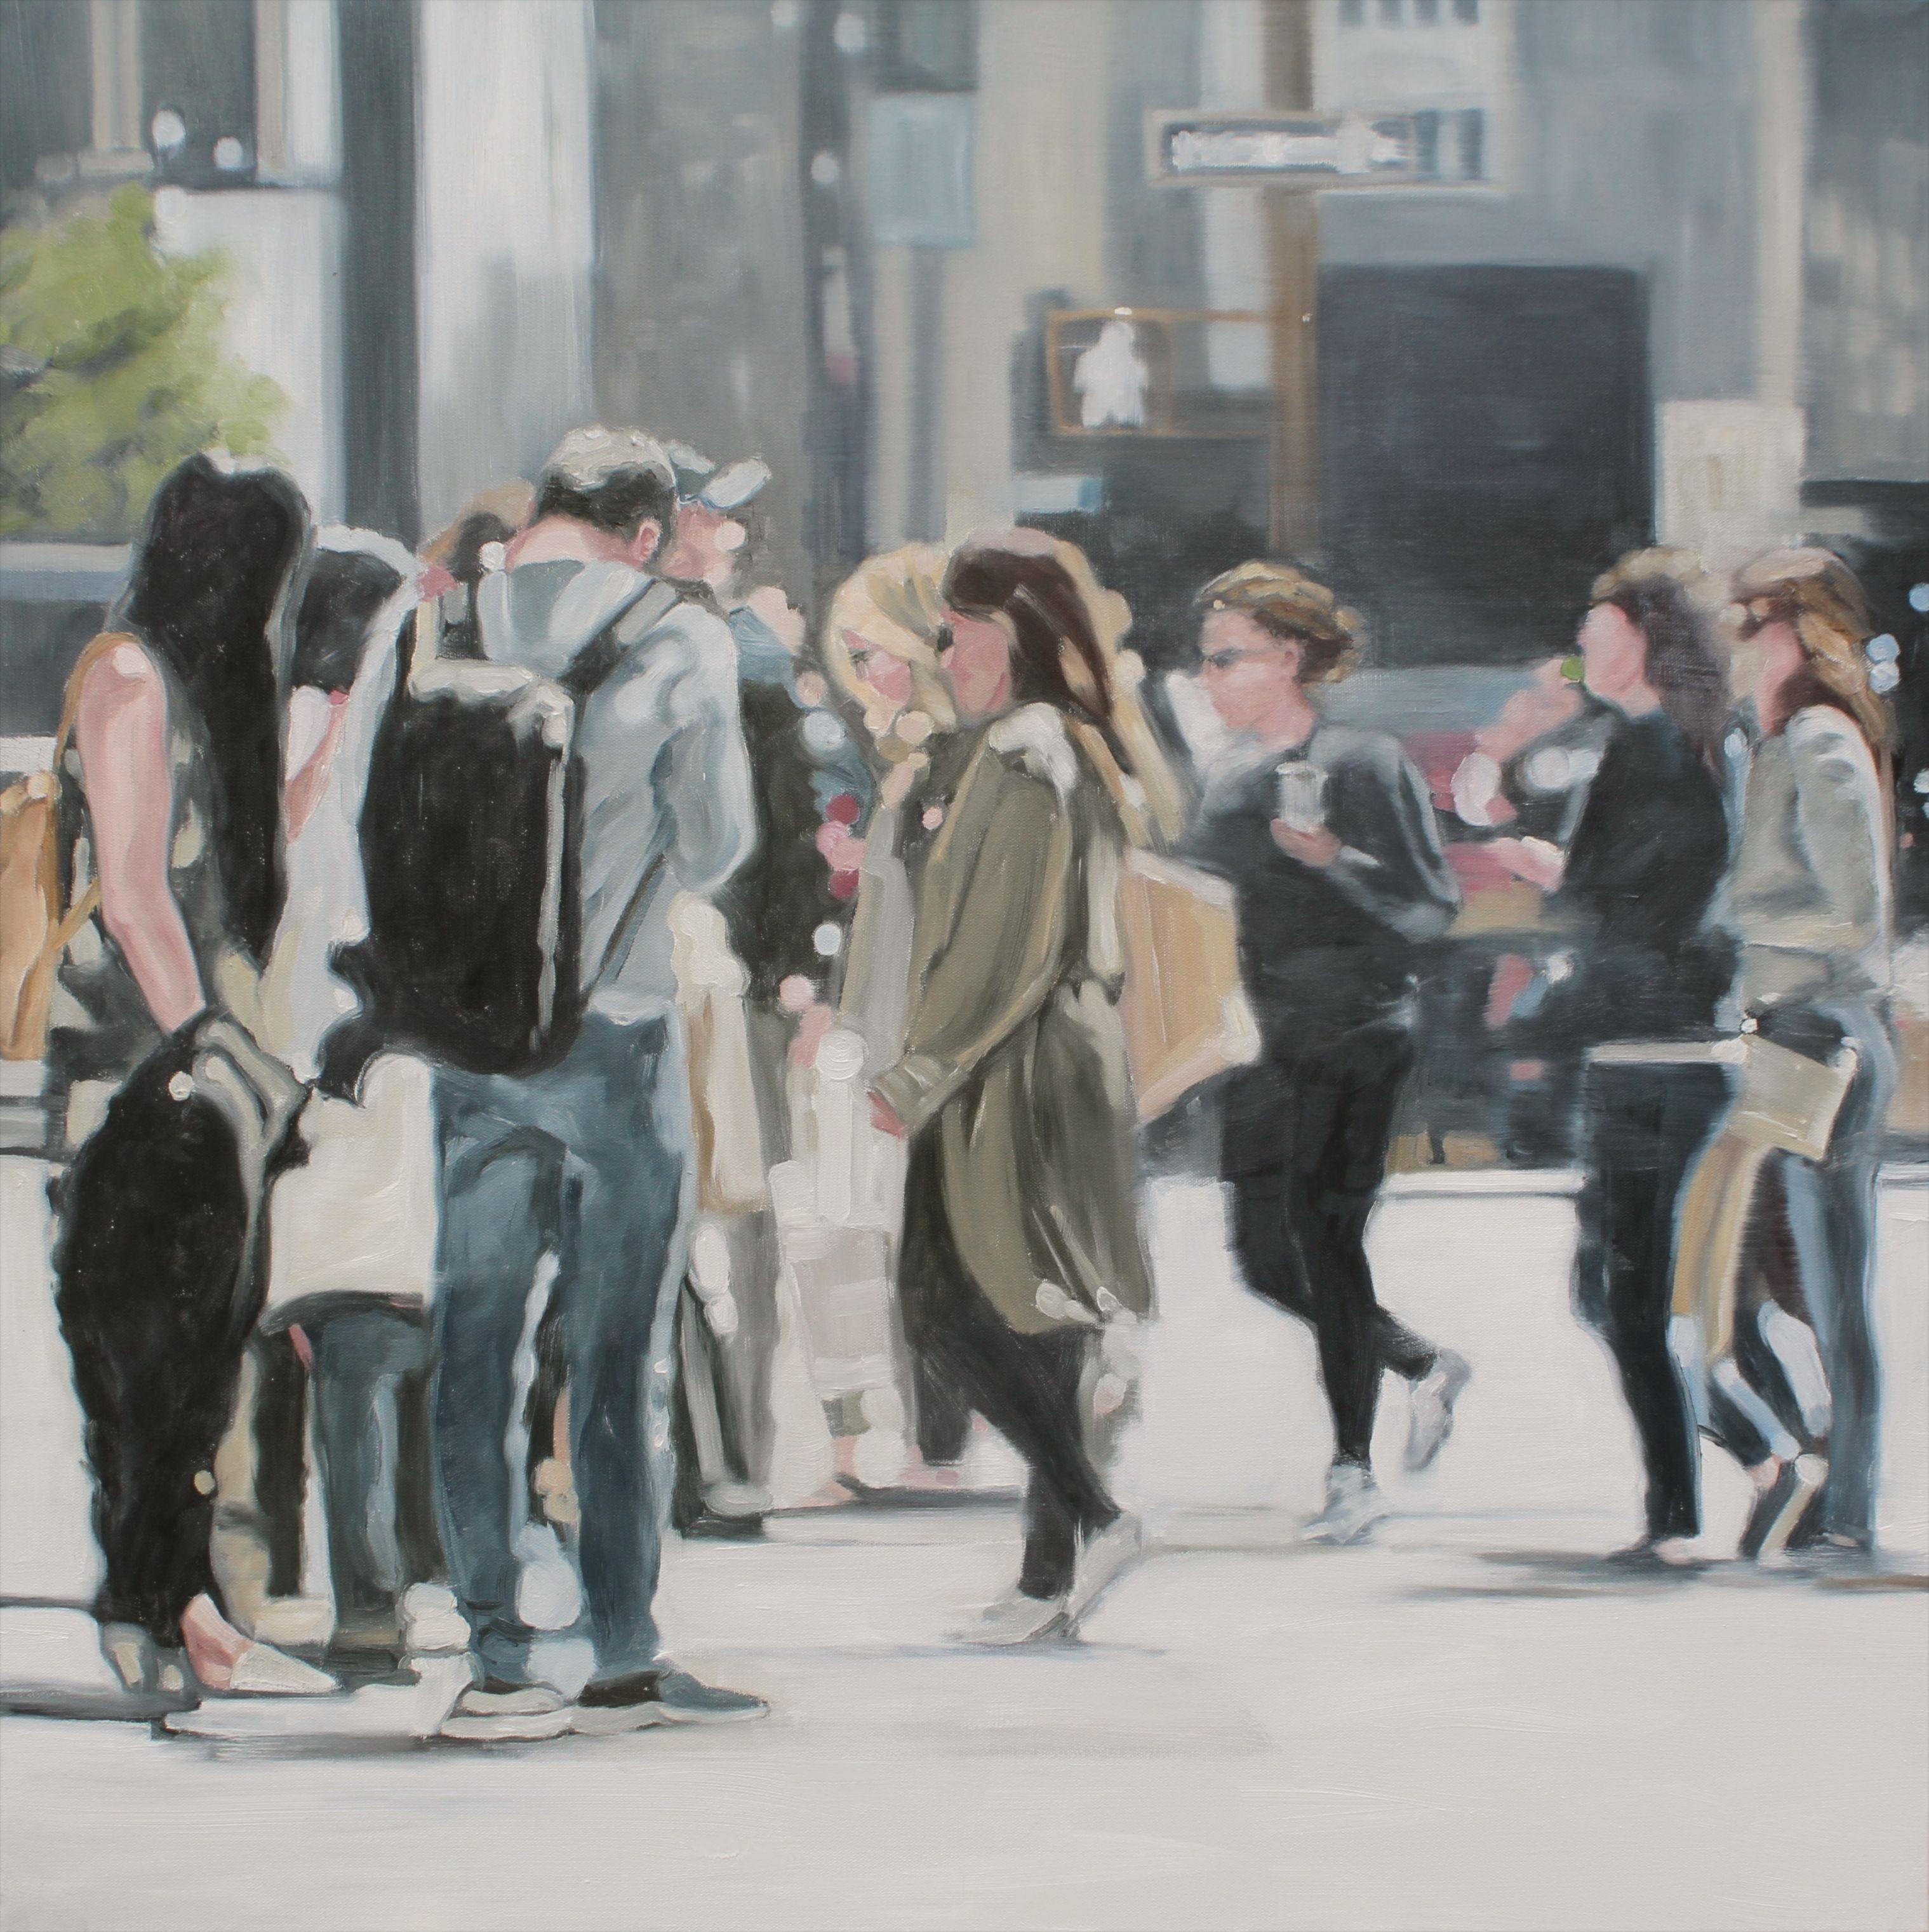 In the city, everyone is moving at their own pace. Much like life. Whether you are getting your bearings and making a plan, moving quickly towards your goal or somewhere in between, the city is the place to observe all. :: Painting :: Contemporary